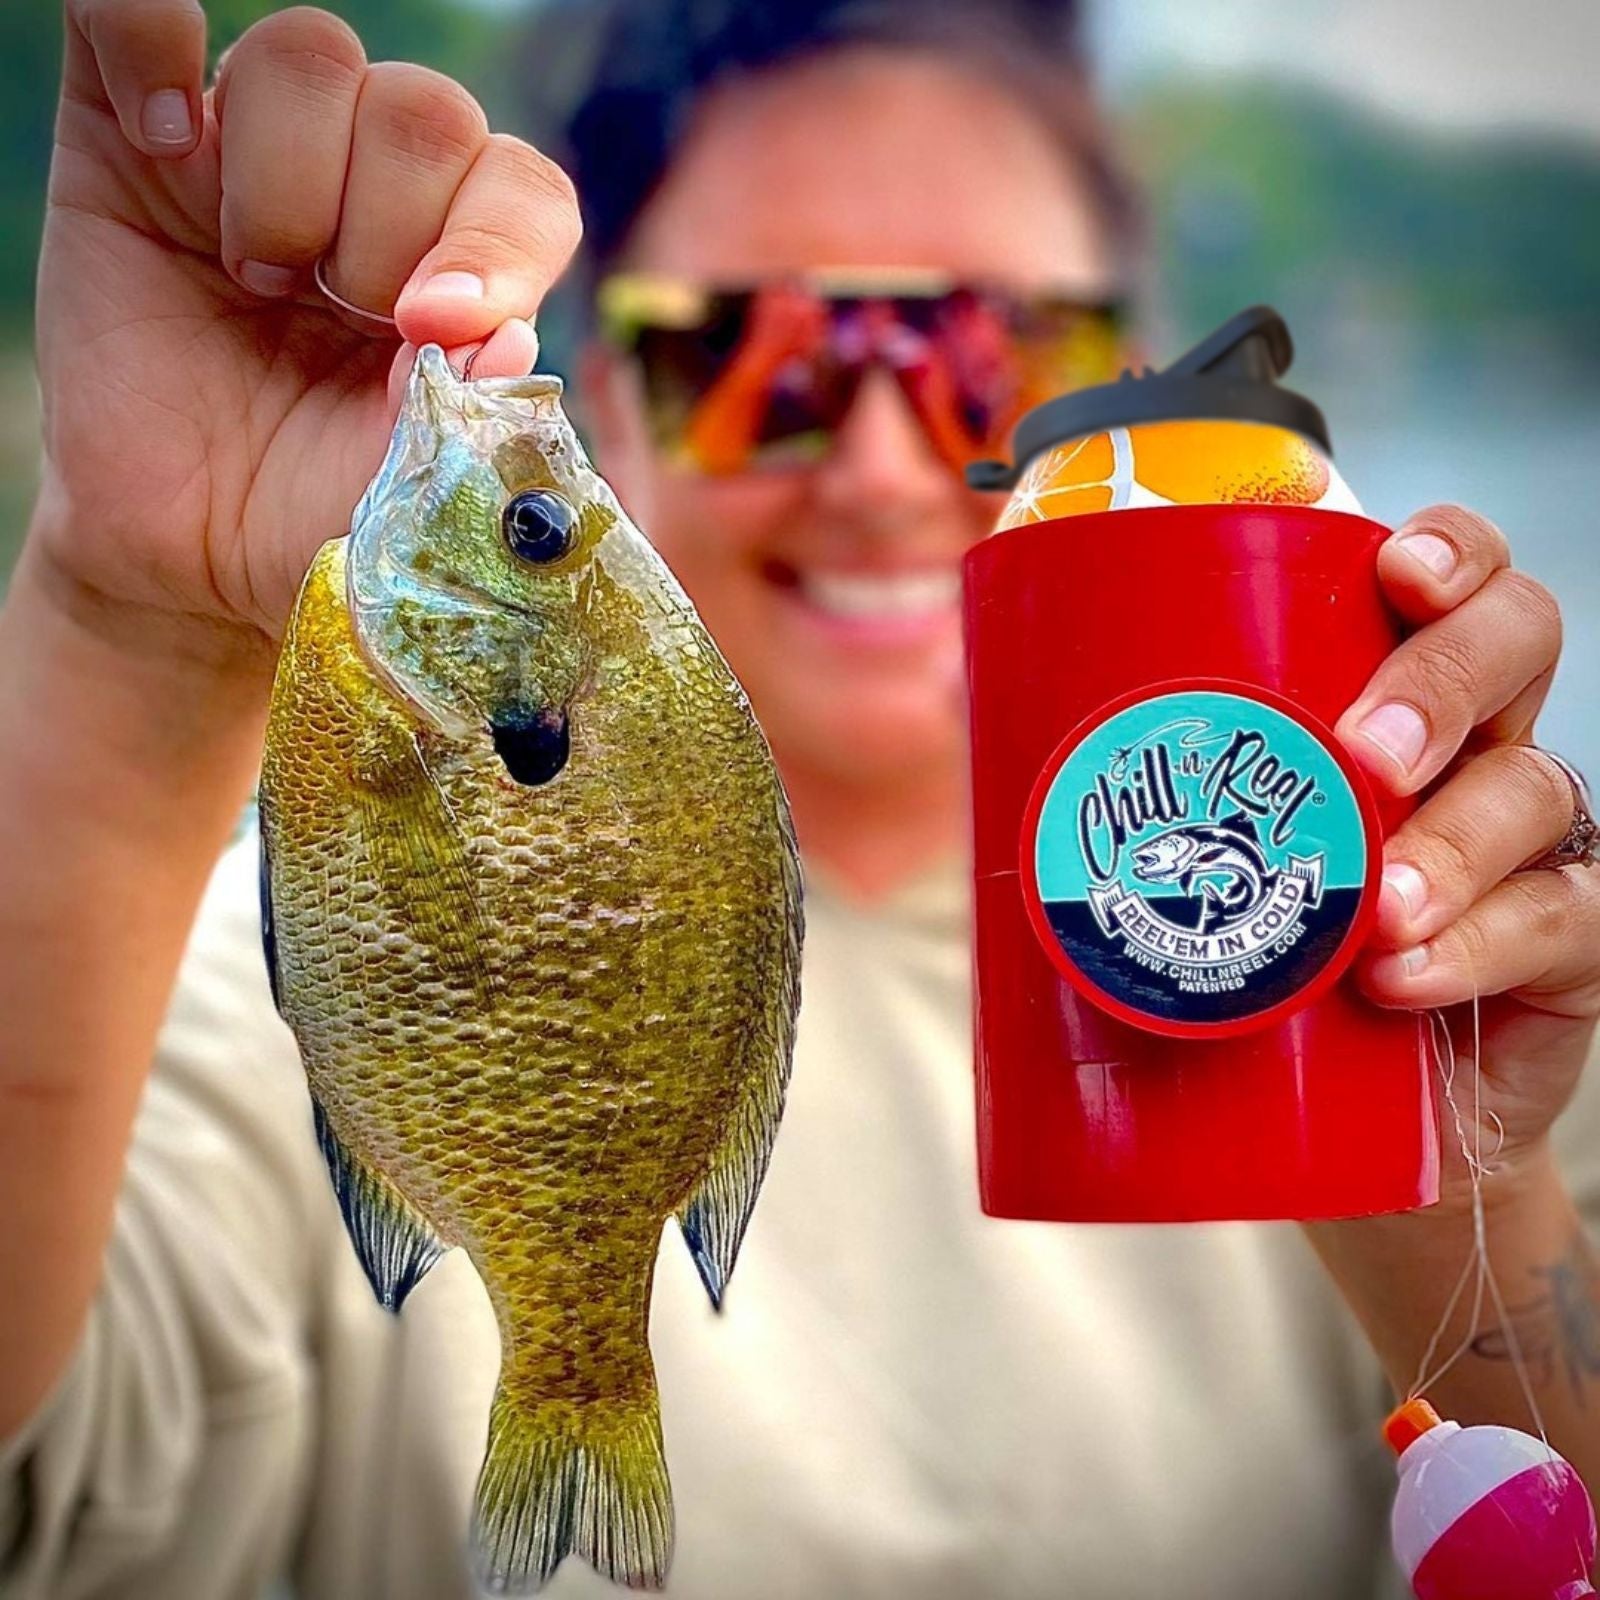 How to cast and catch with the Chill-N-Reel! 🐟🍺🤙 #shorts #fishing 